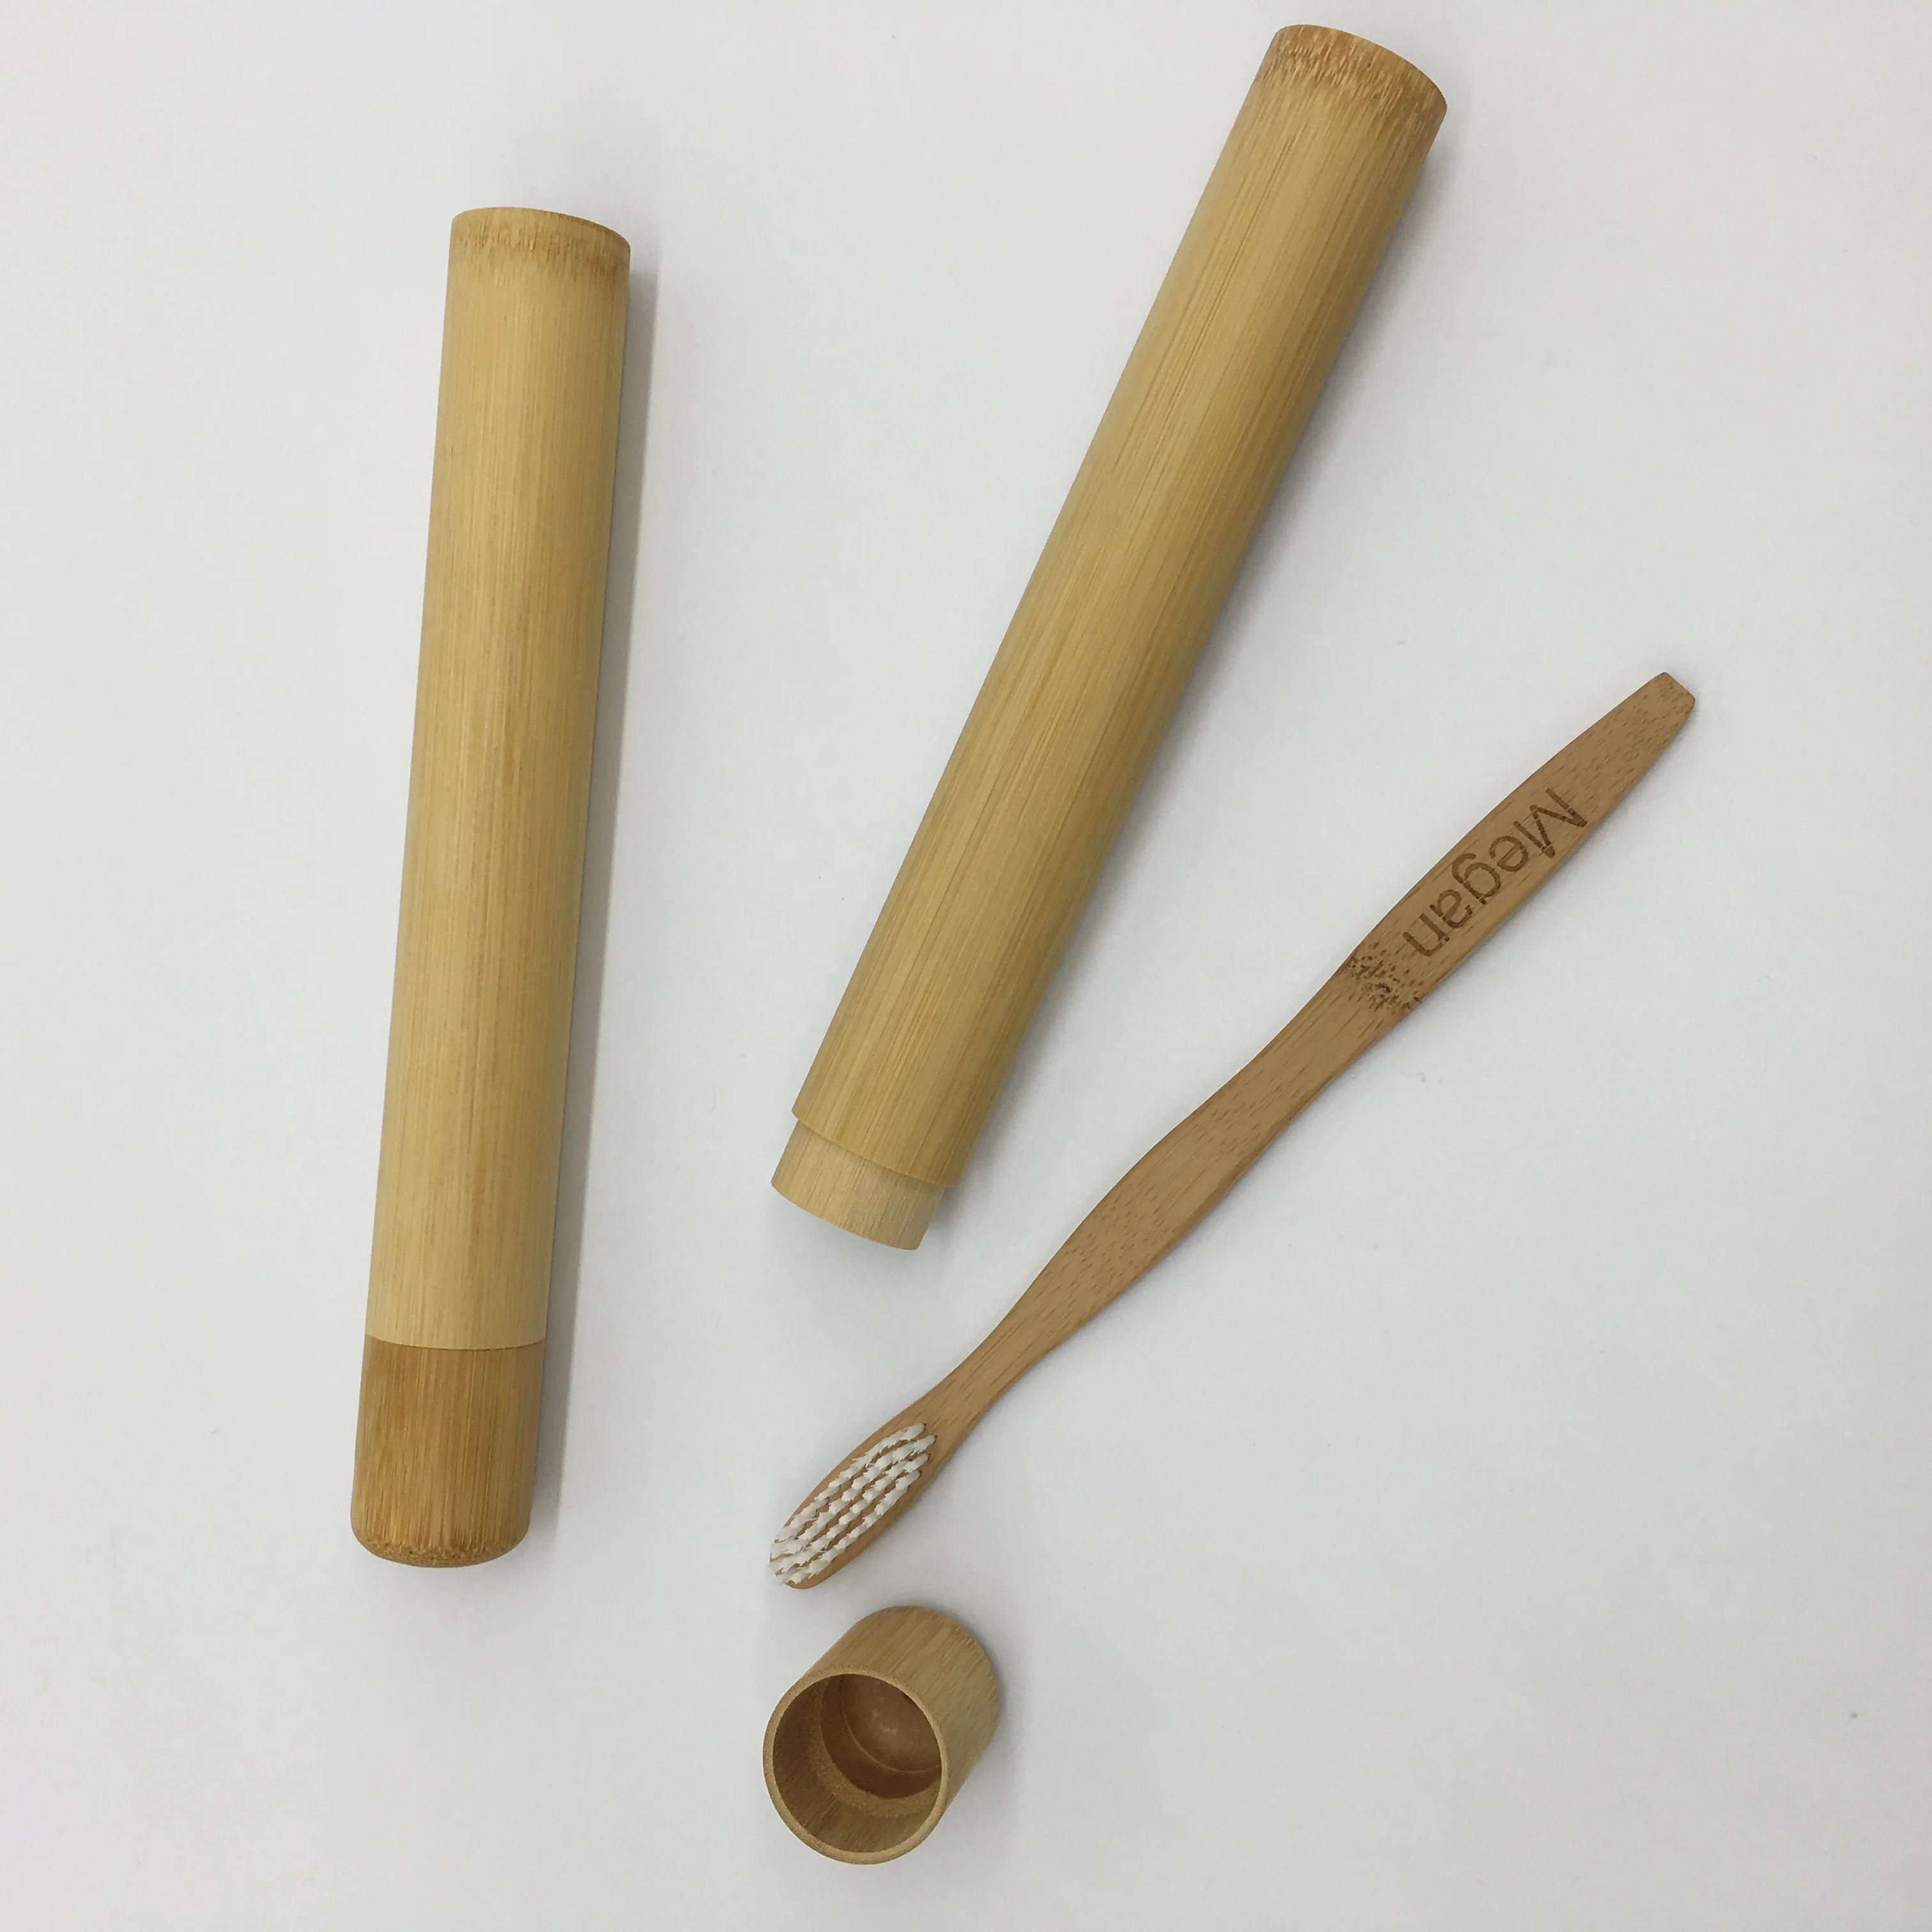 

CE approved high quality 100% bamboo toothbrush kit with nylon 4 bristle